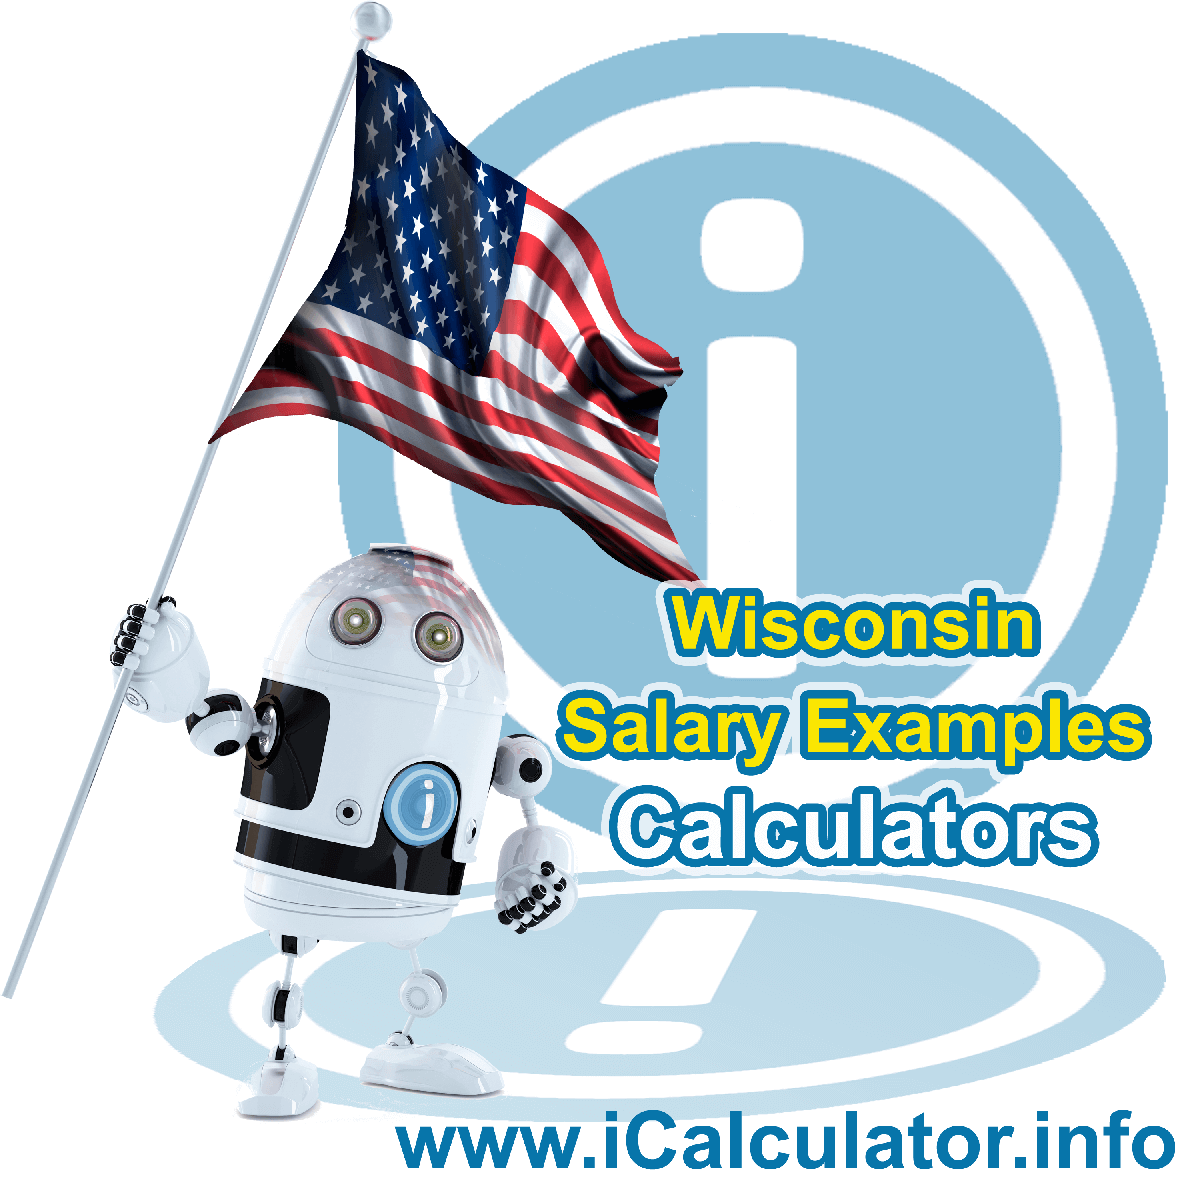 Wisconsin Salary Example for $ 230,000.00 in 2023 | iCalculator™ | $ 230,000.00 salary example for employee and employer paying Wisconsin State tincome taxes. Detailed salary after tax calculation including Wisconsin State Tax, Federal State Tax, Medicare Deductions, Social Security, Capital Gains and other income tax and salary deductions complete with supporting Wisconsin state tax tables 